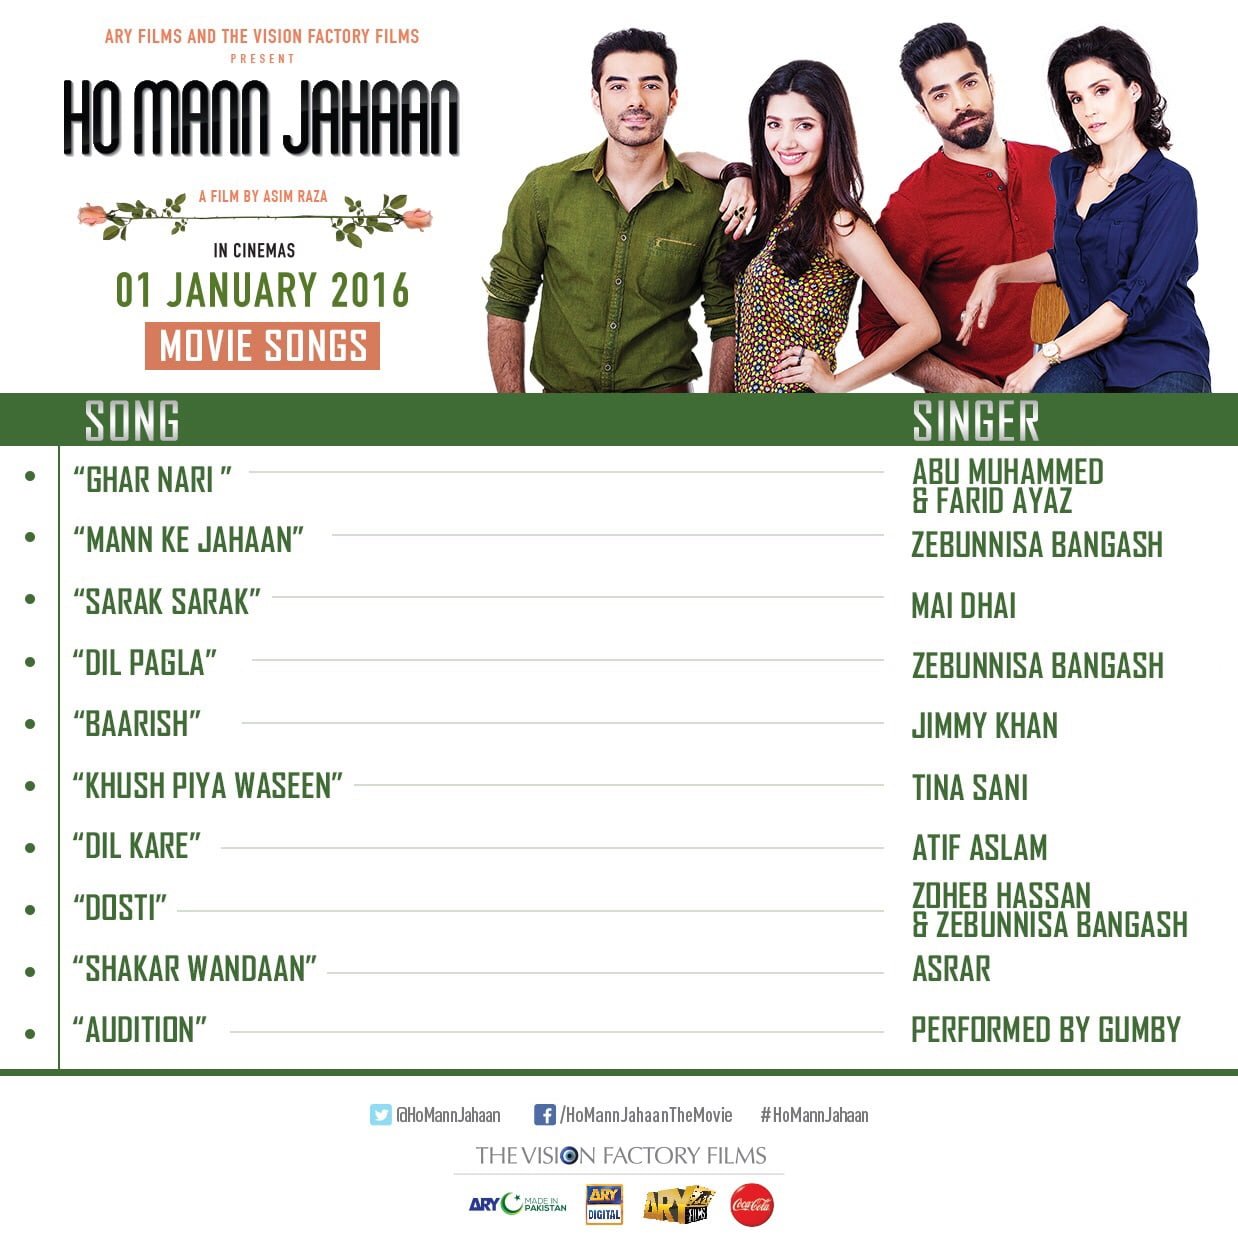 Ho Mann Jahaan film will be releasing nationwide on 1st January 2016